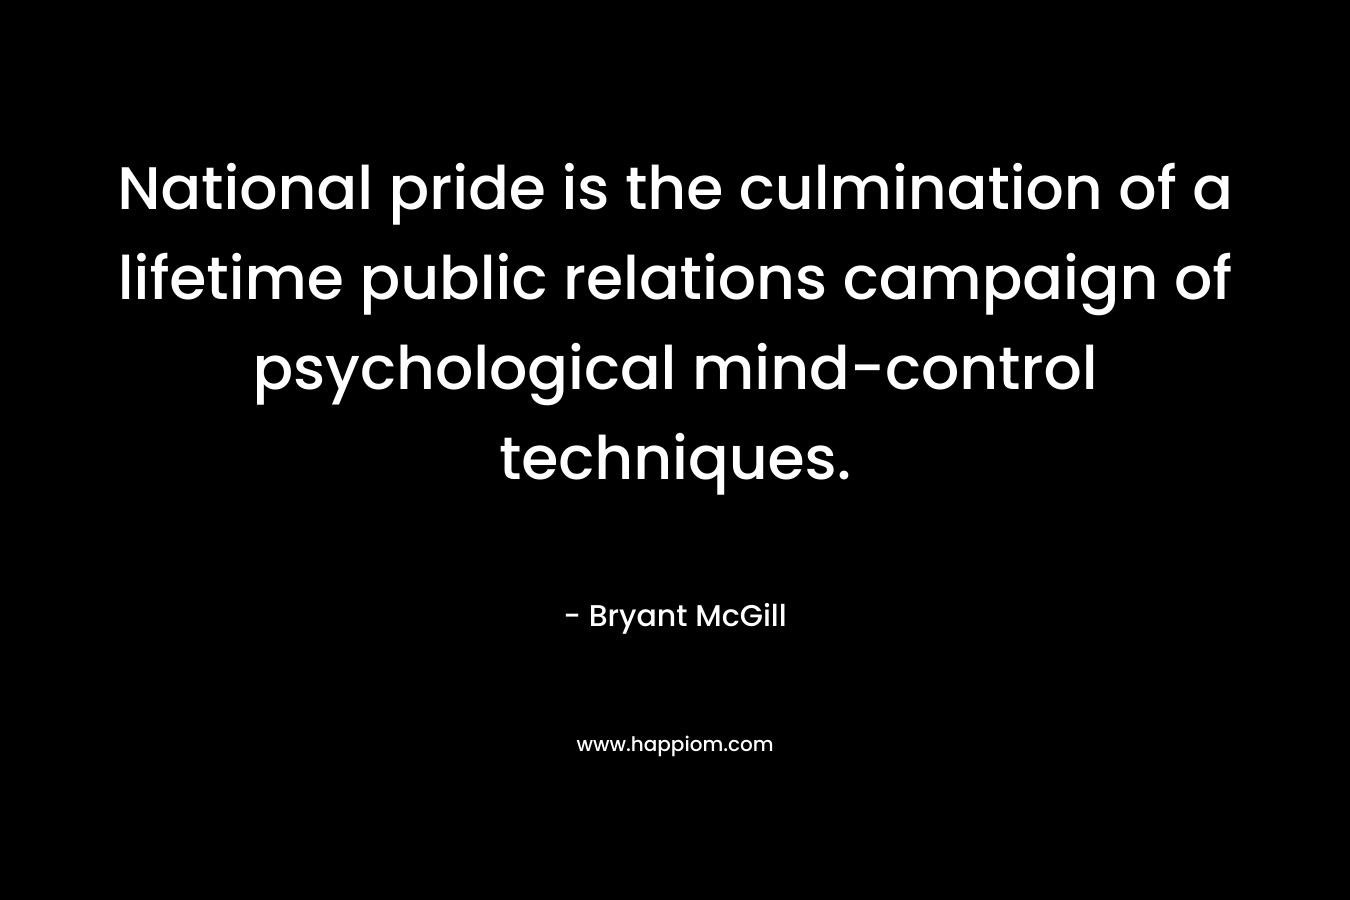 National pride is the culmination of a lifetime public relations campaign of psychological mind-control techniques. – Bryant McGill